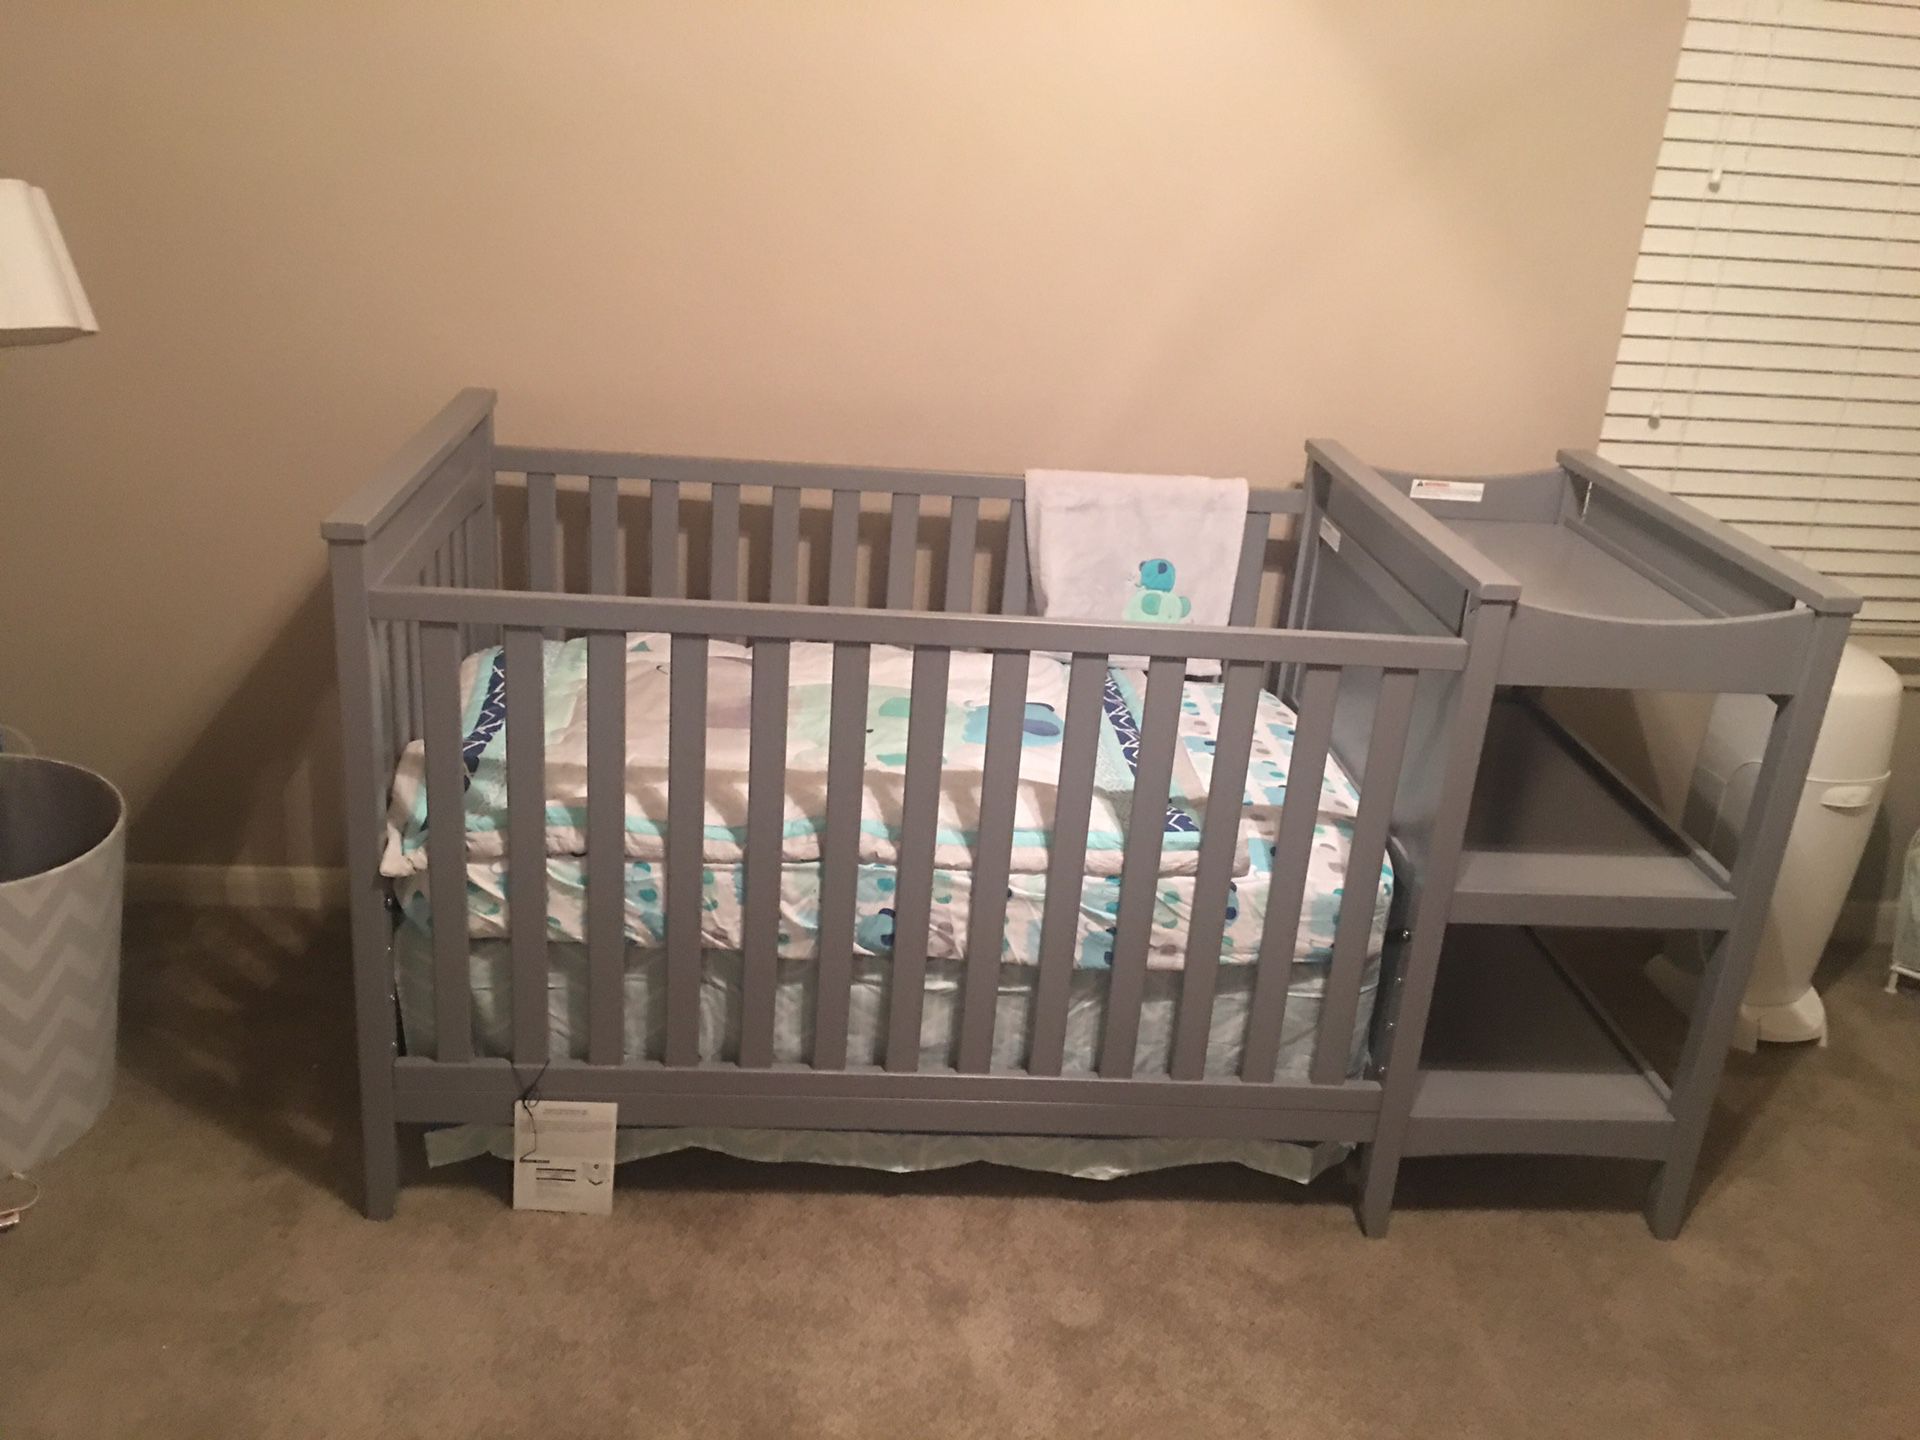 Baby crib and changing table